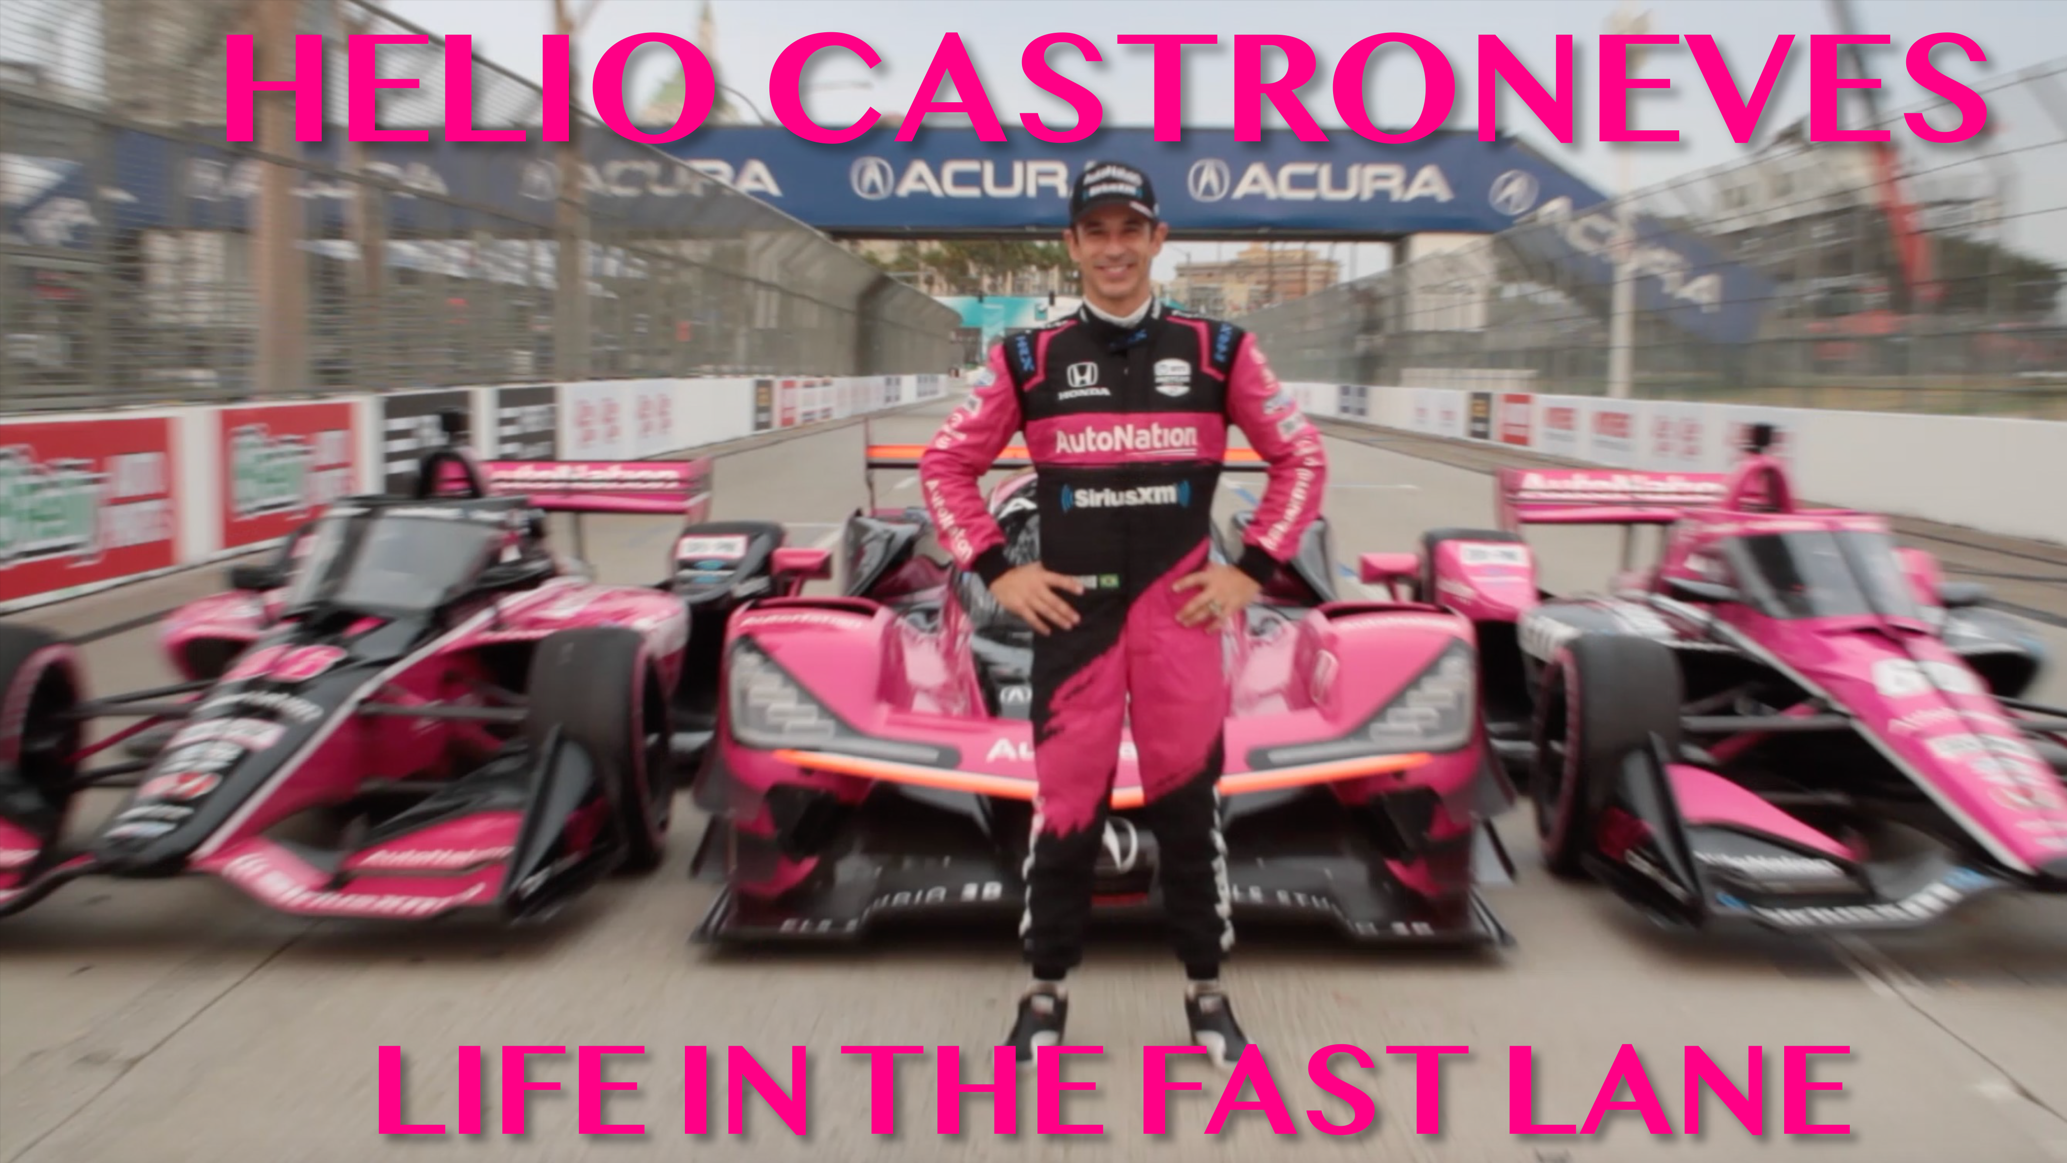 Helio Castroneves, Life in the Fast lane slate image.